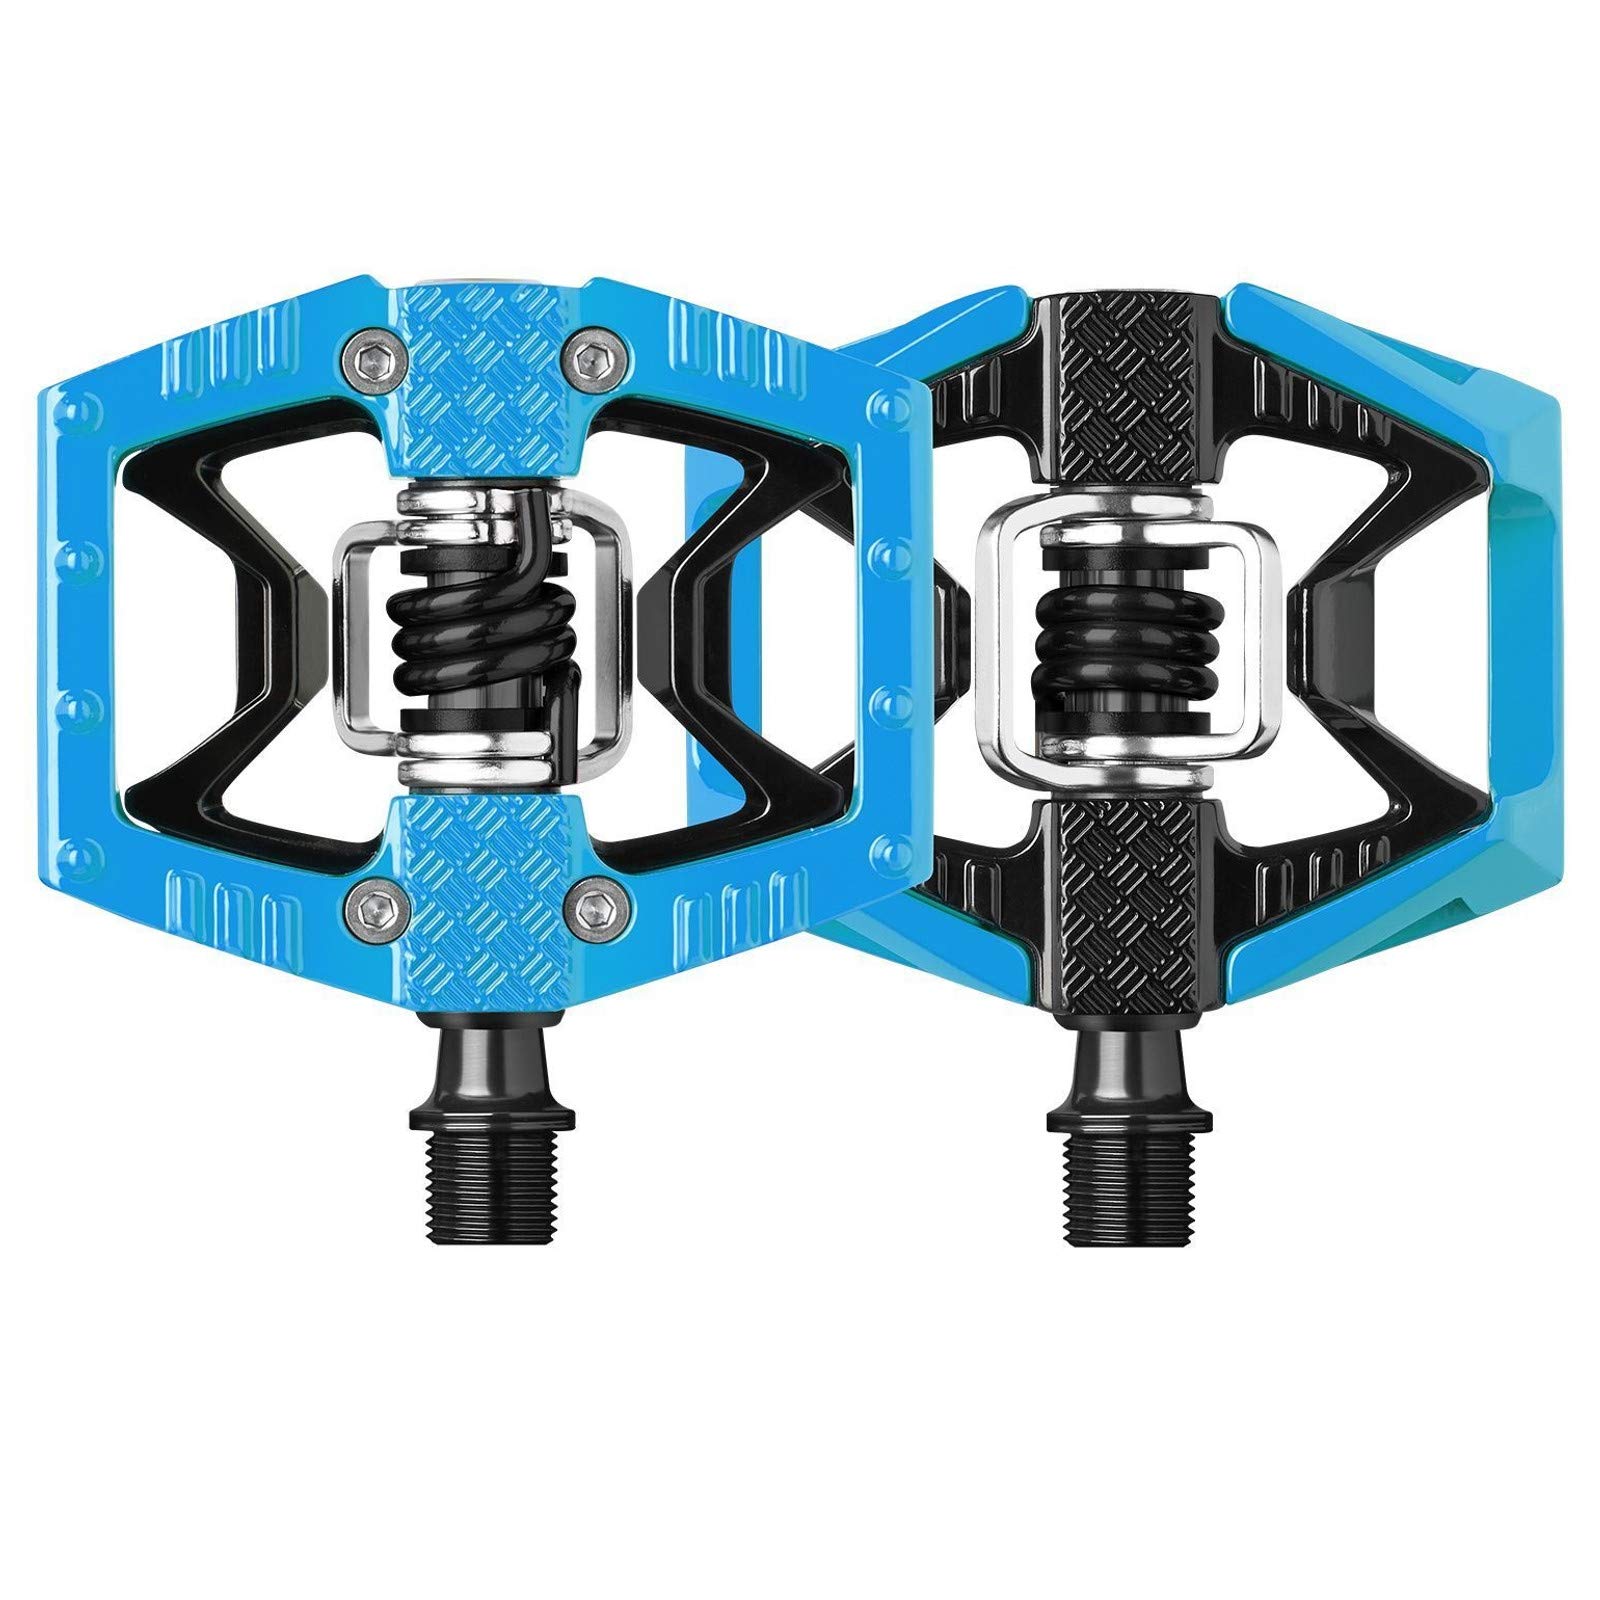 Review – Crankbrothers Double Shot 2 Hybrid Clip-In Pedals